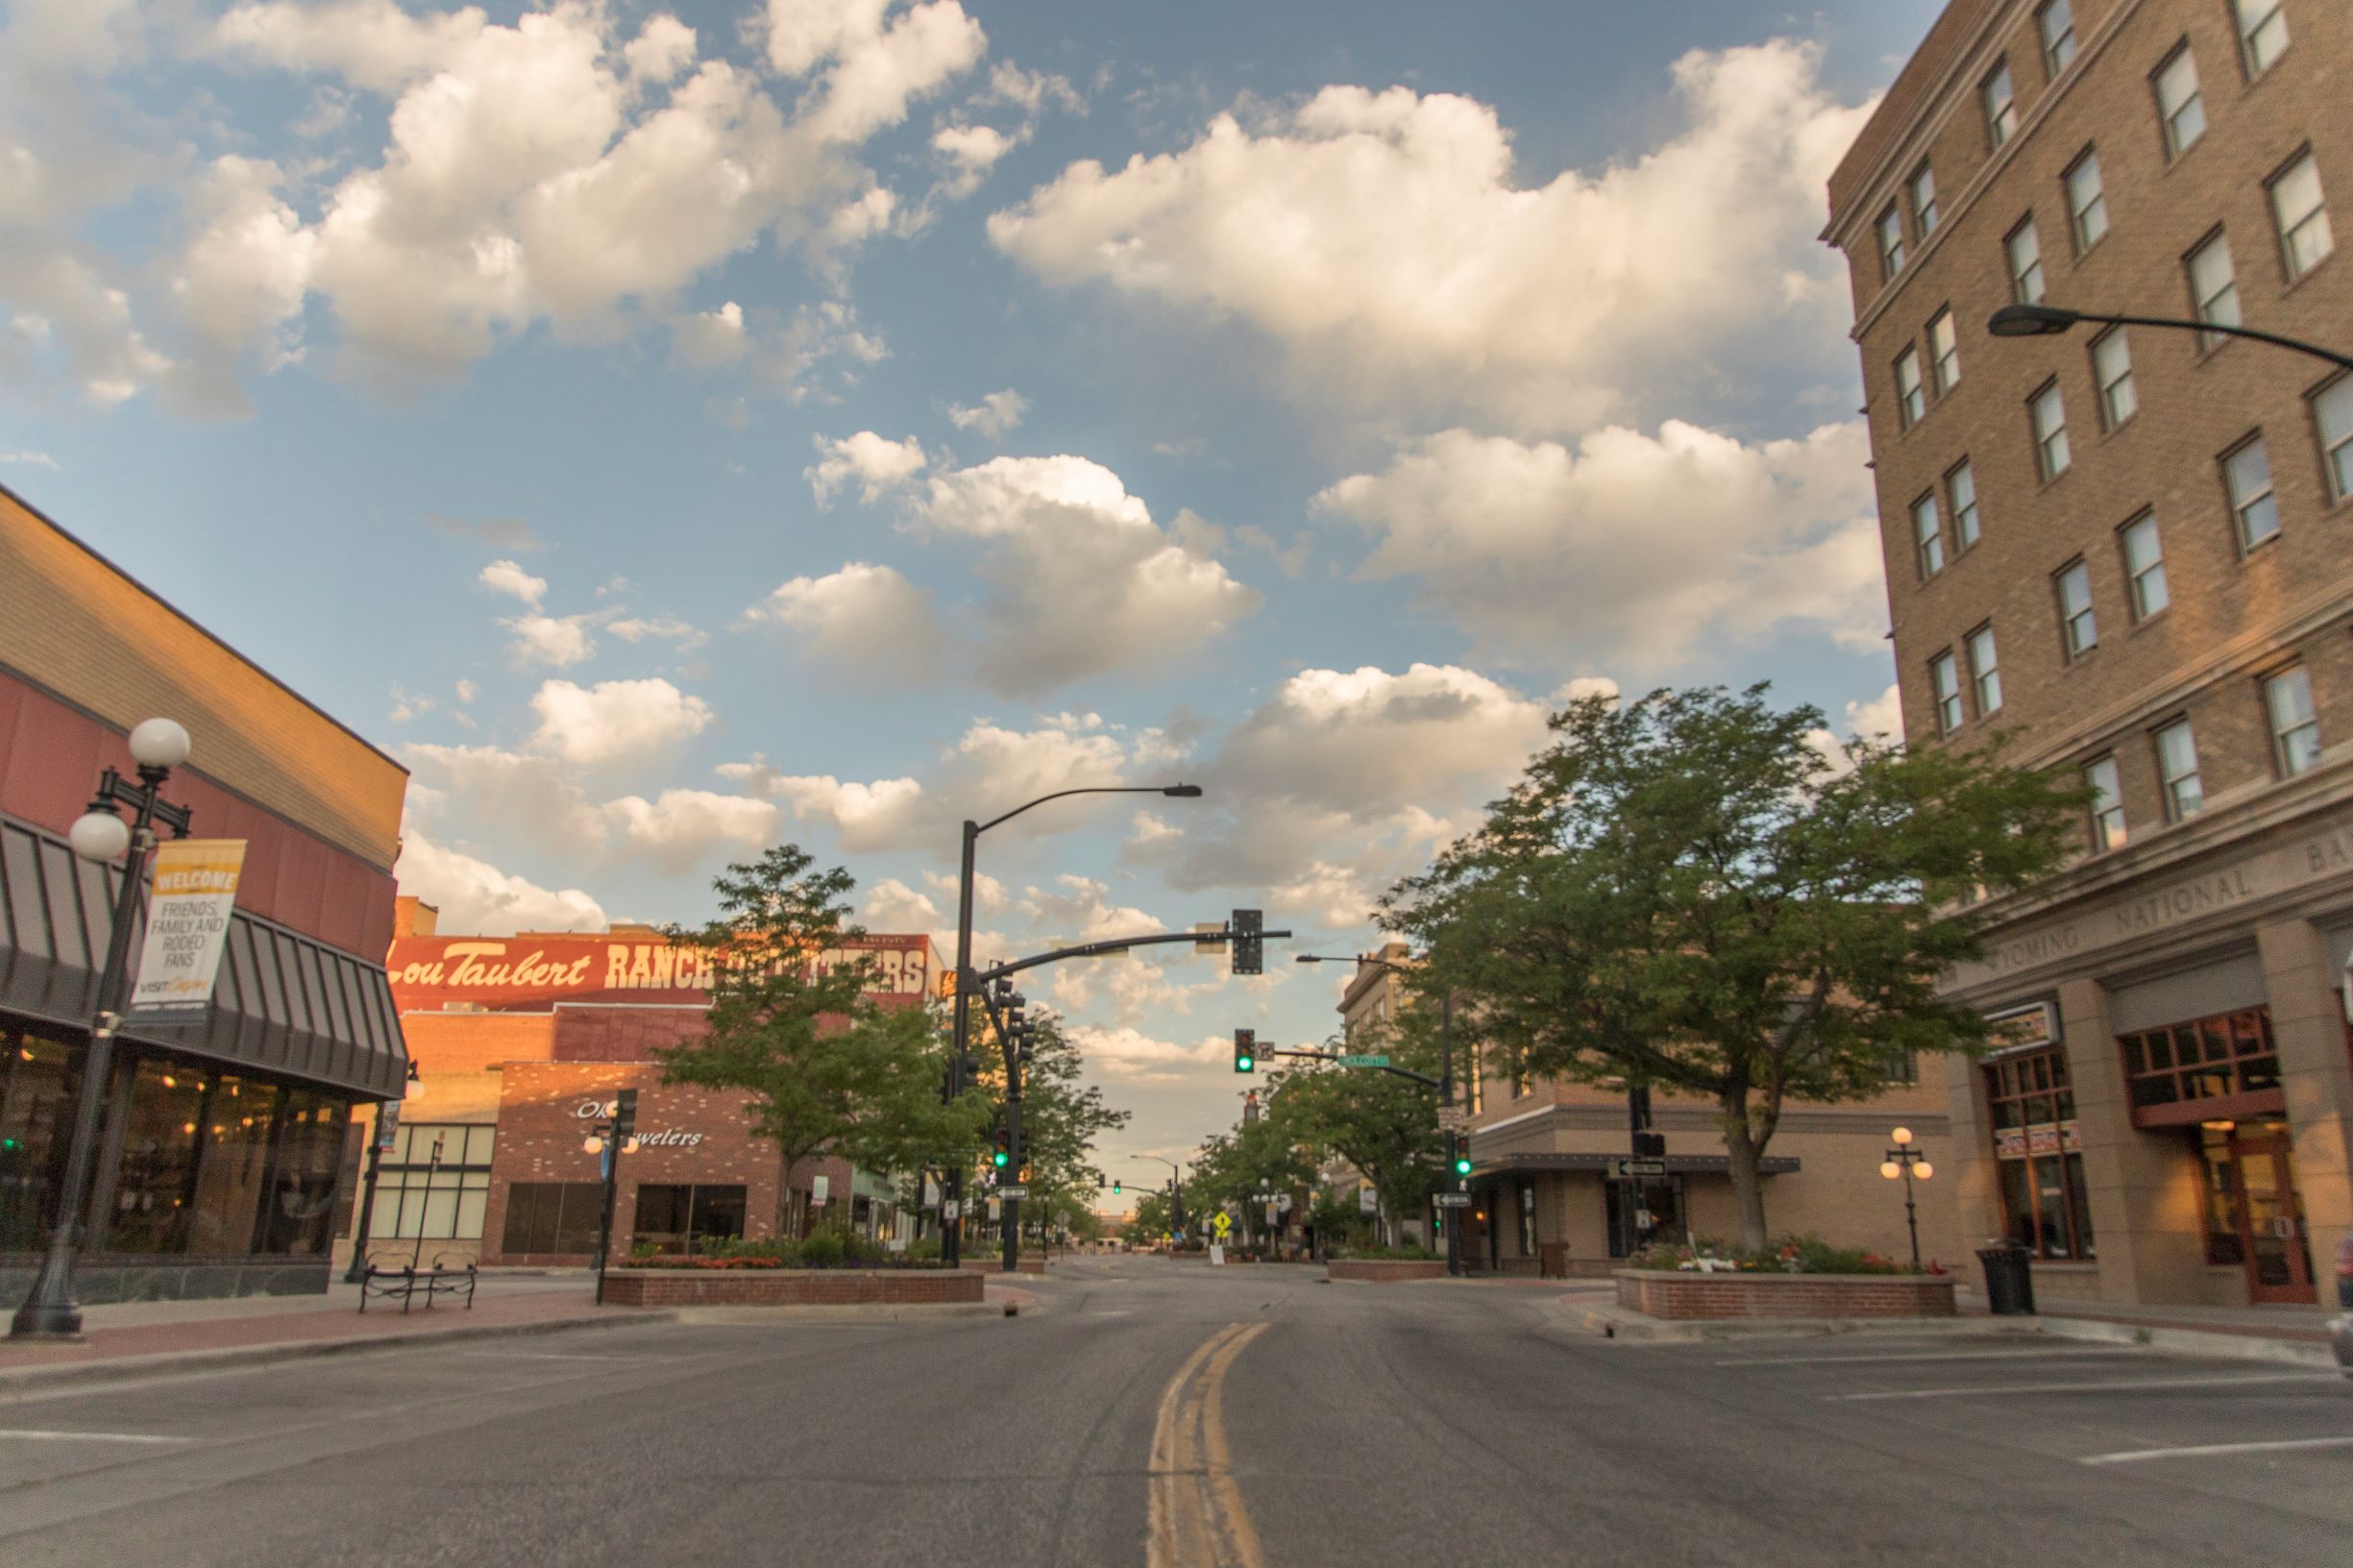 Downtown Casper, located blocks from I-25, has a charming downtown with locally owned shops, restaurants, a 102-year-old western store and David Street Station, an outdoor venue that's hosting some of the events during Casper Pride. 